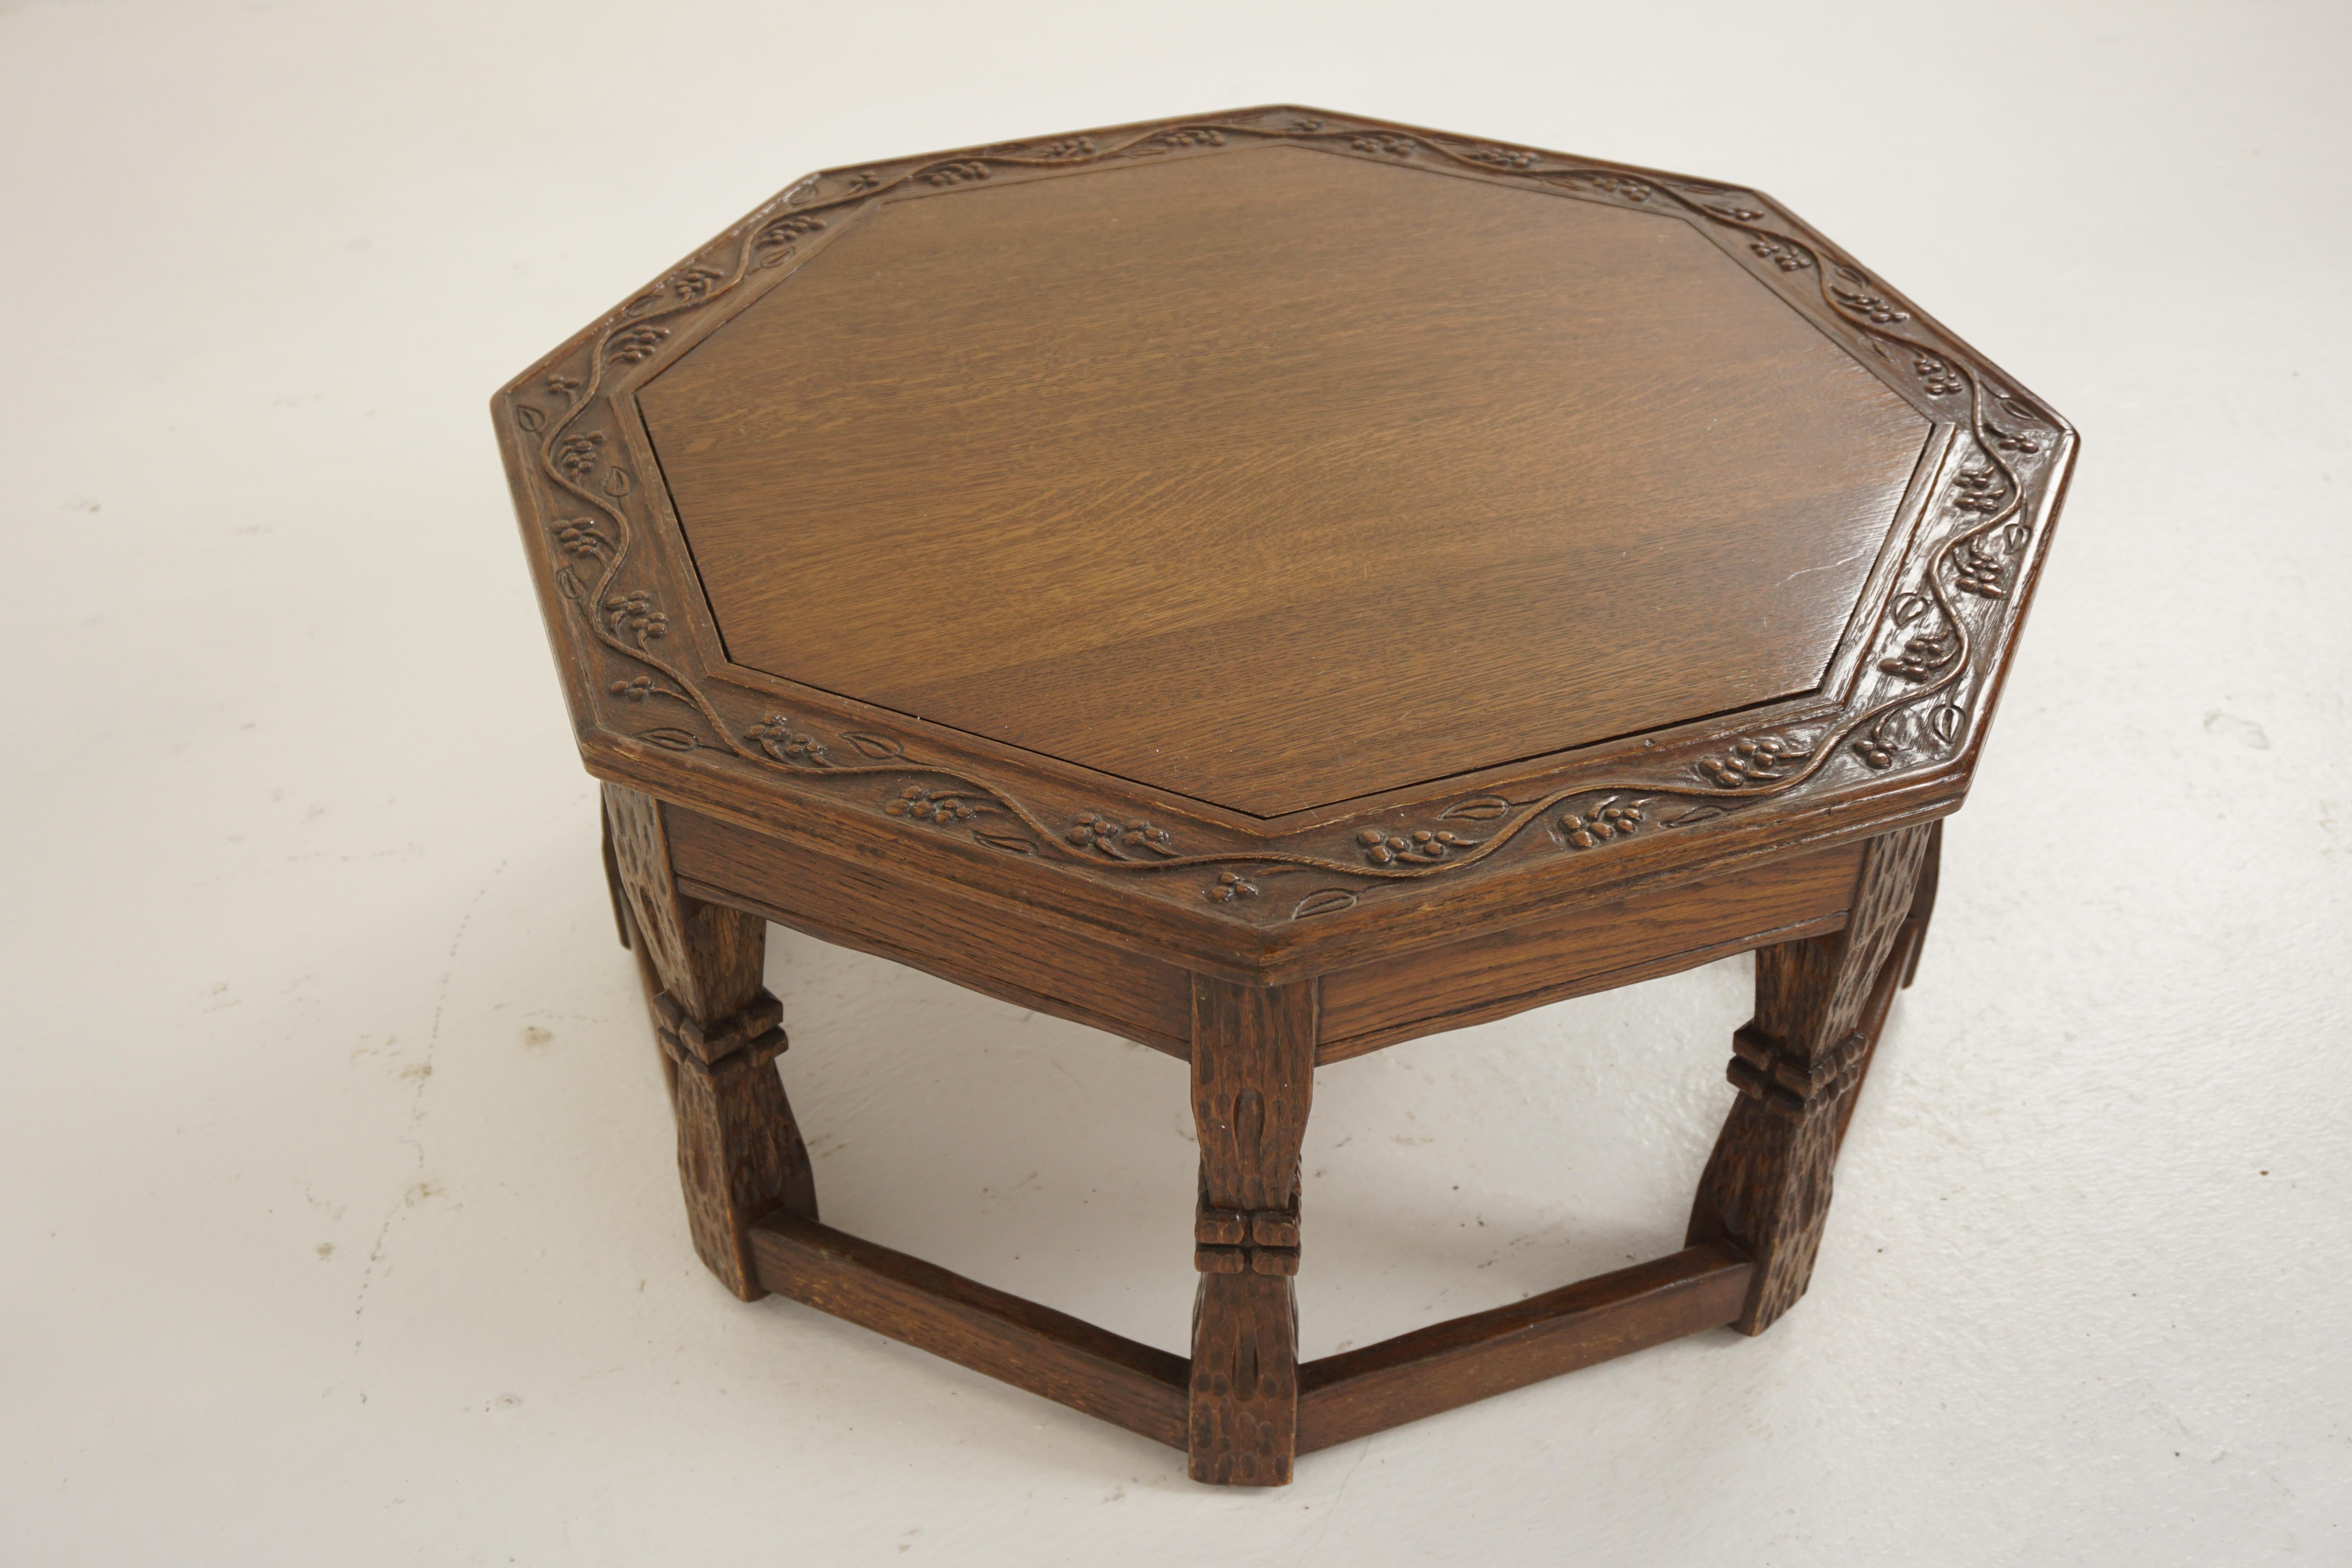 Vintage Carved Oak Octagonal Coffee Table With Drawer, American 1950, H1196

America 1950
Solid Oak
Original finish
Octagonal shaped top with carved leaves on border
Single Pull out drawer
Standing on eight carved stubby legs
Connected by stretchers